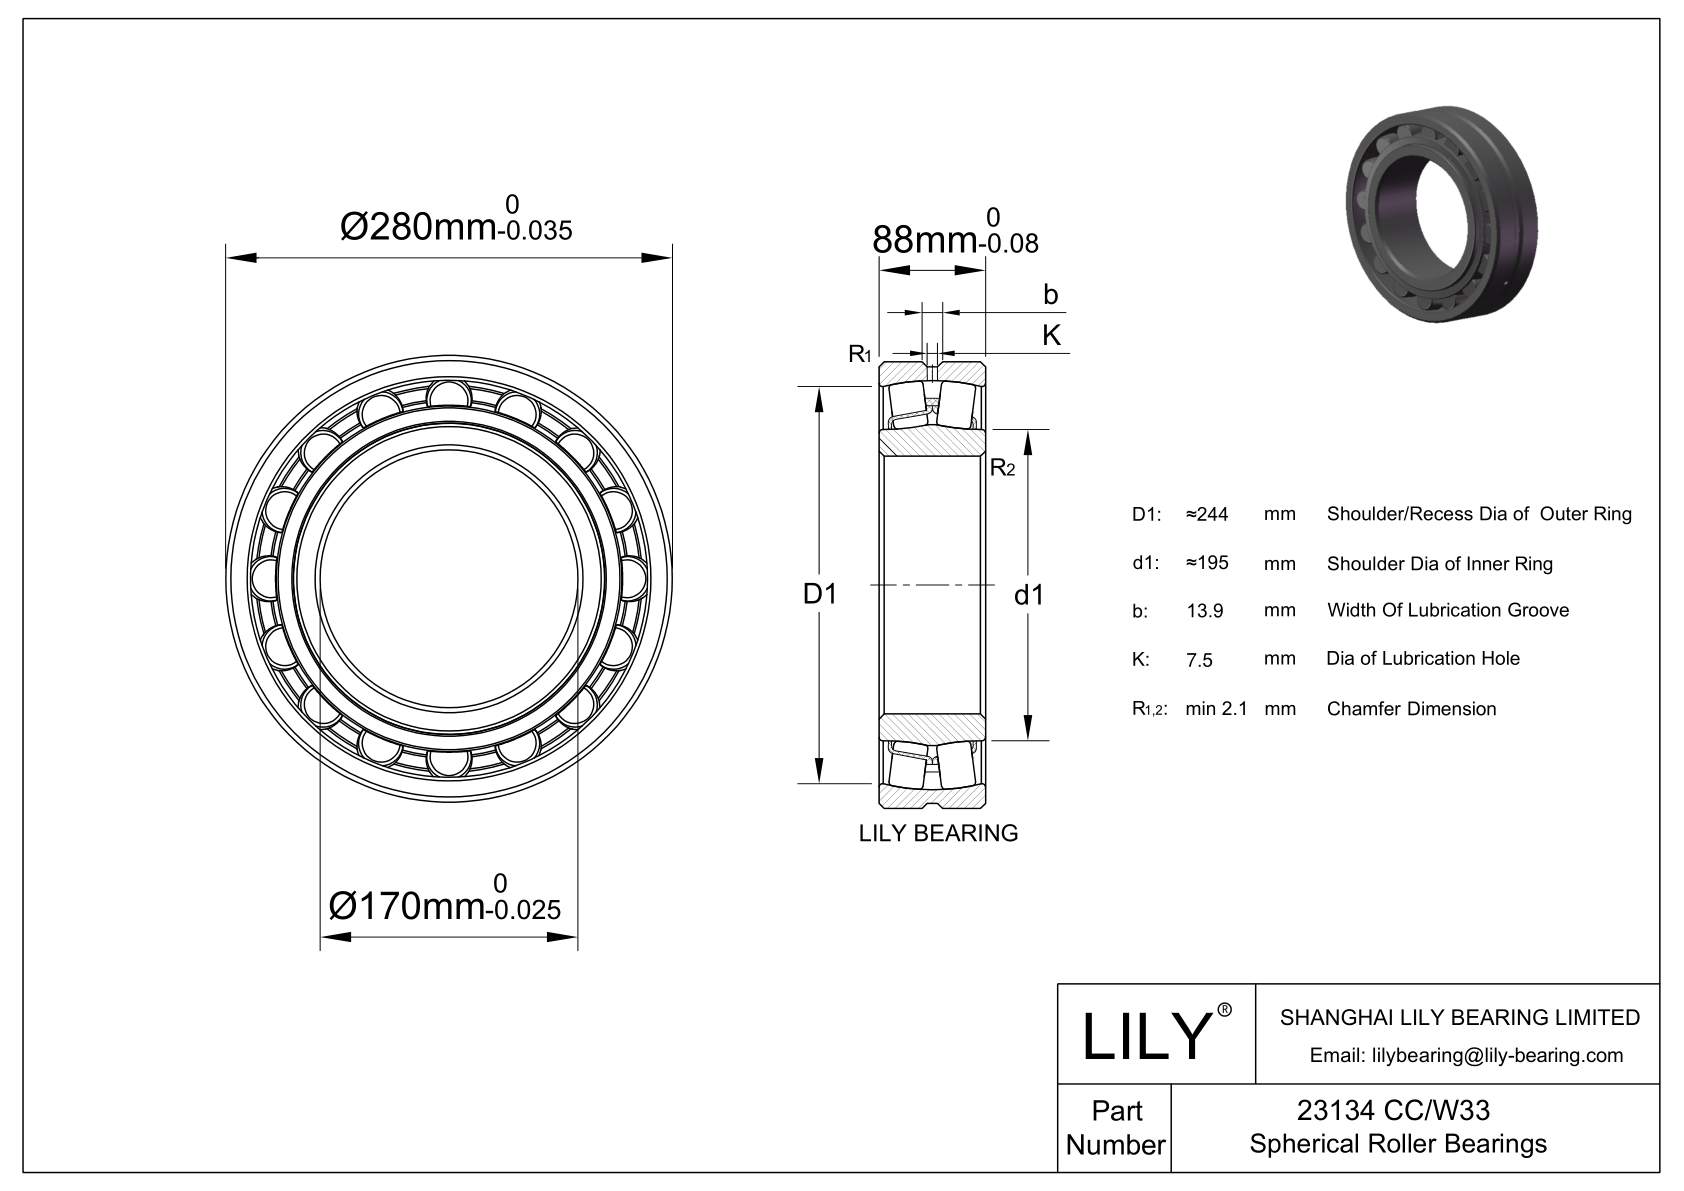 23134 CC/W33 Double Row Spherical Roller Bearing cad drawing